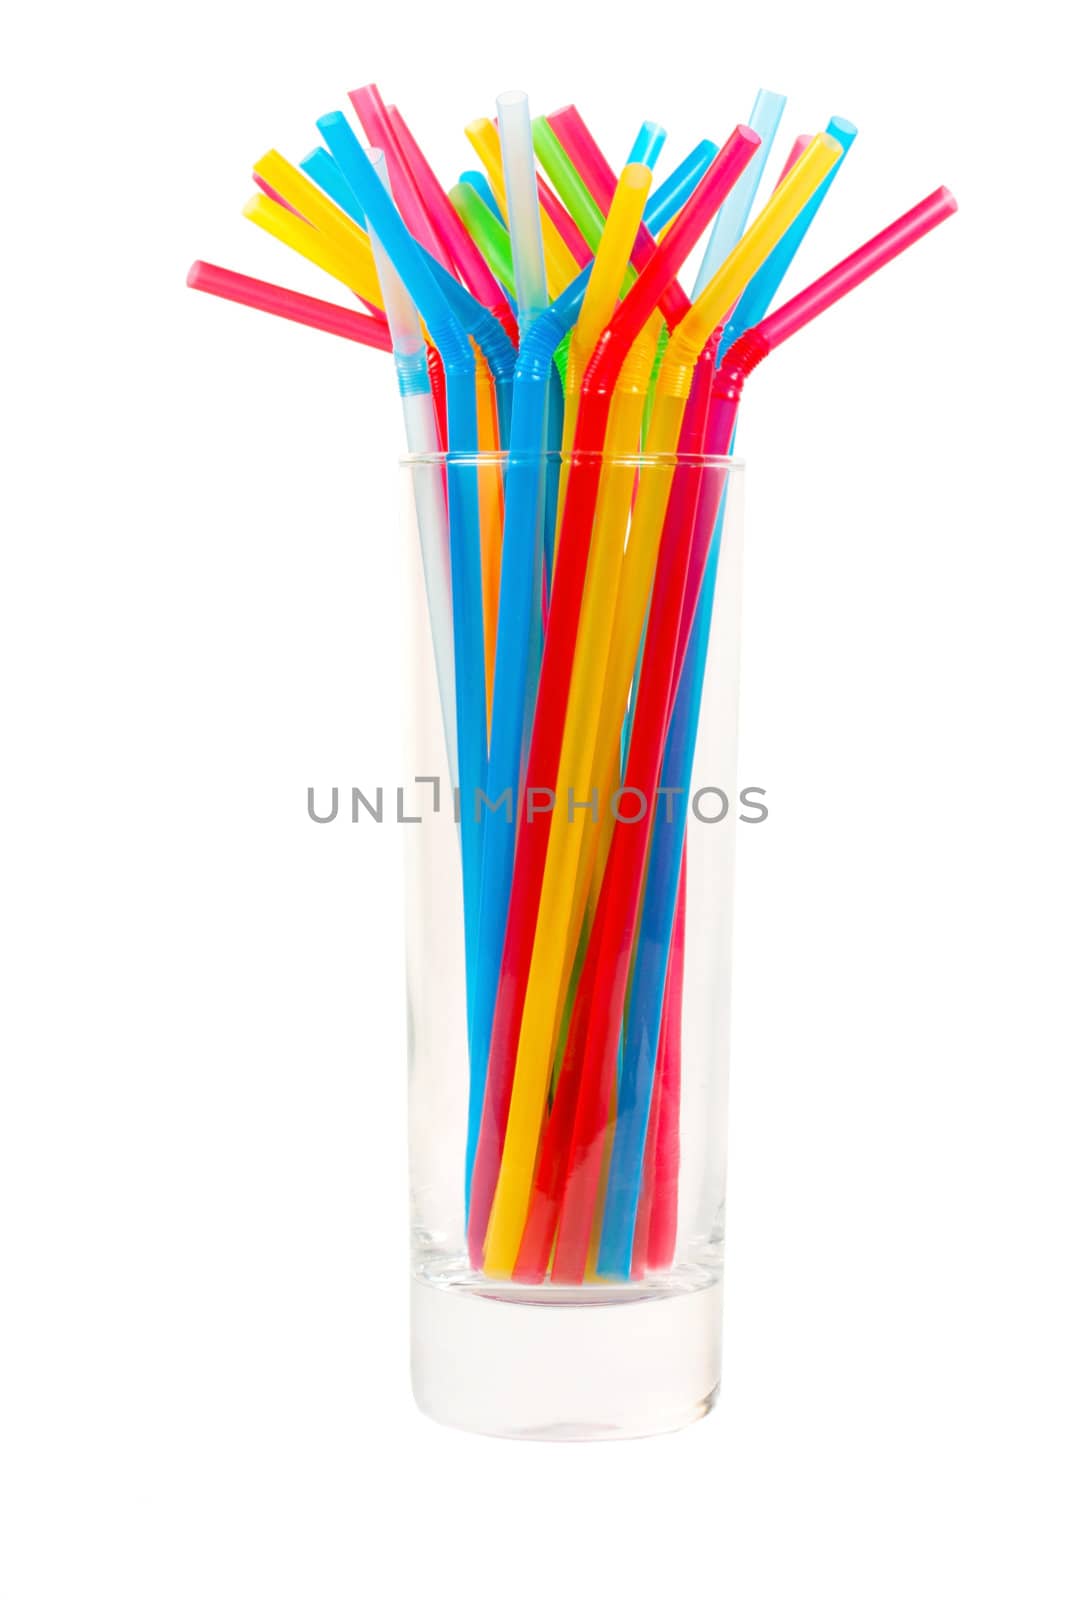 set cocktails straw in glass isolated on white background